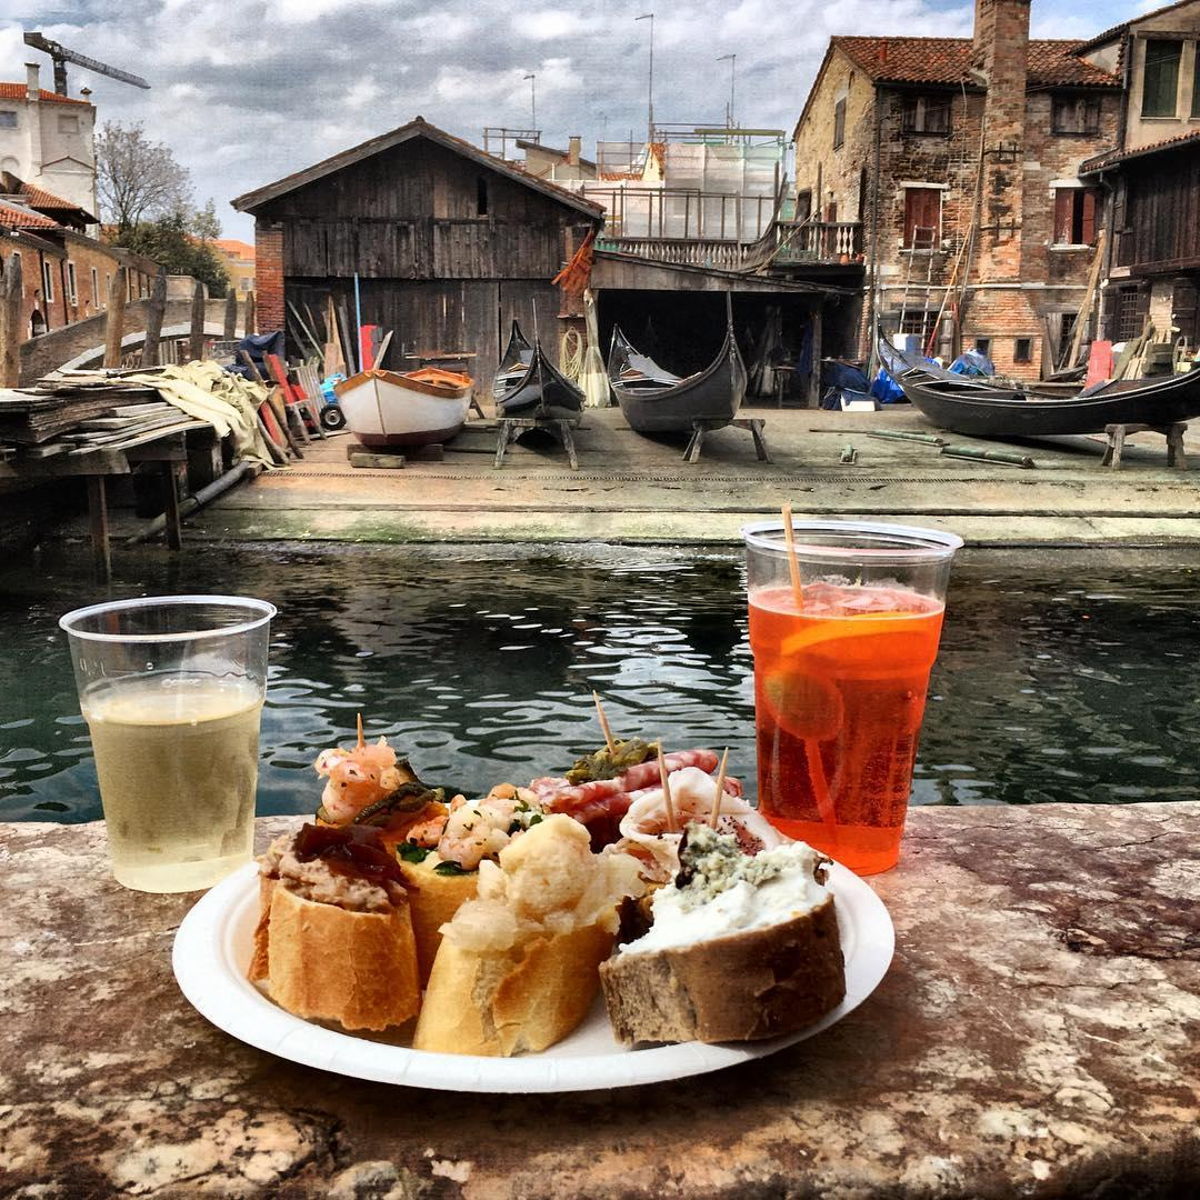 Food tour and aperitif in Venice